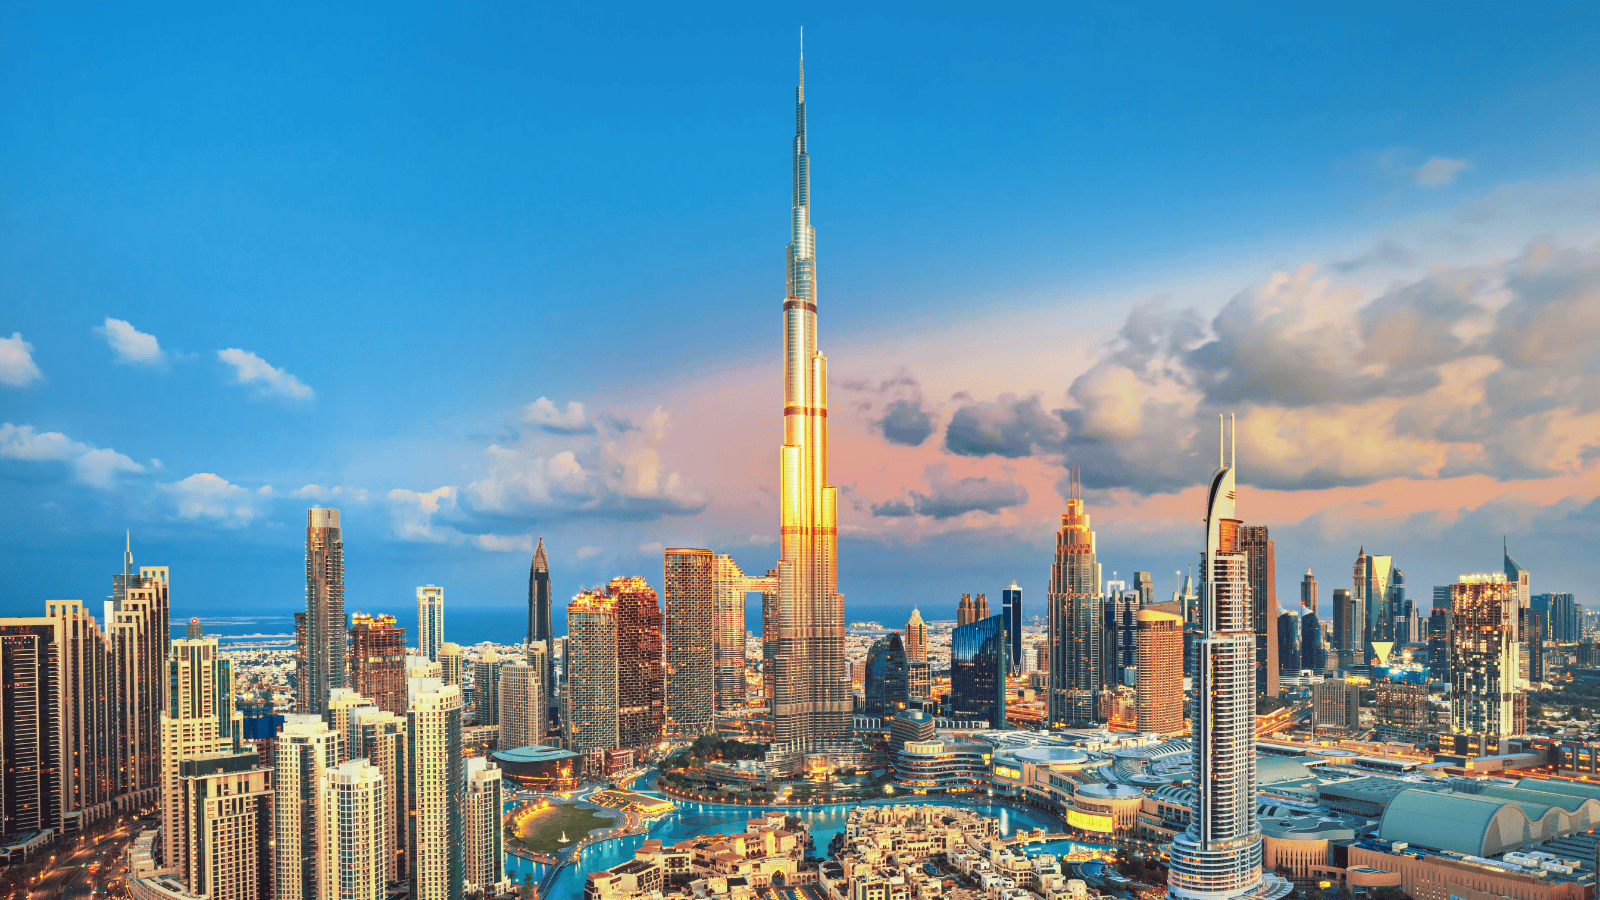 <p>Two airlines in the United Arab Emirates (UAE) allow travelers to explore the country’s most popular cities: Abu Dhabi and Dubai.</p><p>Etihad Airways’ <a href="https://www.etihad.com/en-us/abu-dhabi/stopover" rel="nofollow external noopener noreferrer">Abu Dhabi stopover</a> program provides travelers with up to two nights at a hotel of their choice in the city. The airline operates a free shuttle to take tourists on eight different routes that include stops such as Yas Island, Saadiyat Island, and the city center.</p><p>Meanwhile, the <a href="https://www.emirates.com/us/english/discover-dubai/dubai-stopover/" rel="nofollow external noopener noreferrer">Emirates Dubai stopover program</a> allows passengers to break up their flight to add a couple of days of a stopover in Dubai at no additional charge, plus offers benefits like 24-hour hotel check-in and discounts. Passengers traveling with Emirates that have layovers up to 24 hours (Economy) or 26 hours (Business) can take advantage of the Dubai Connect program, which offers free hotel stays, meals, transportation, visas, and more.</p>